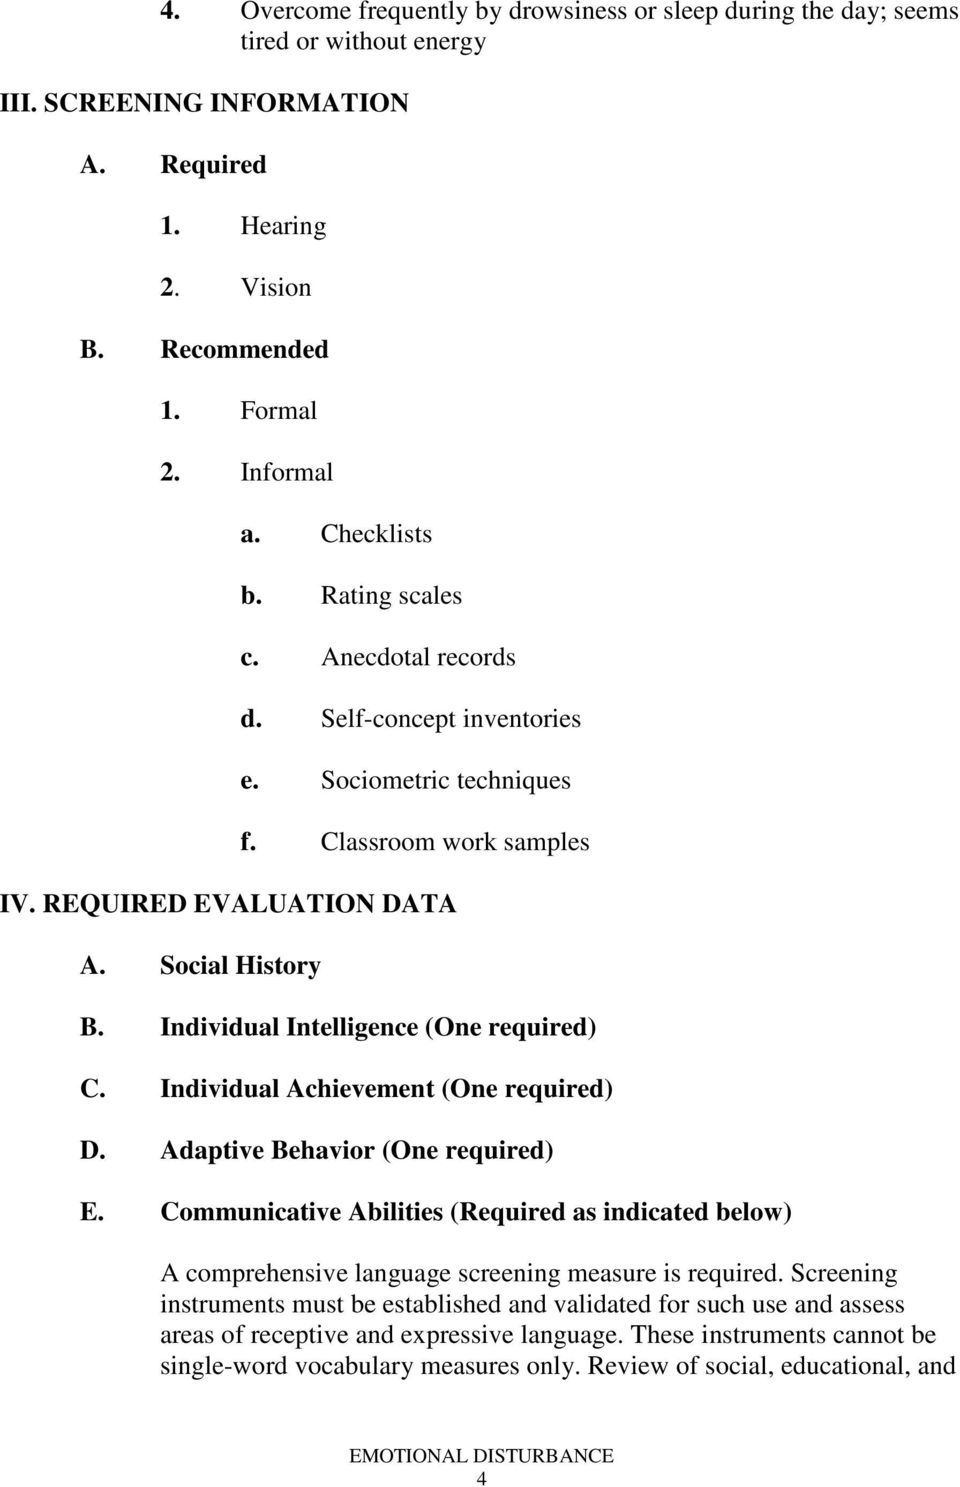 Individual Intelligence (One required) C. Individual Achievement (One required) D. Adaptive Behavior (One required) E.